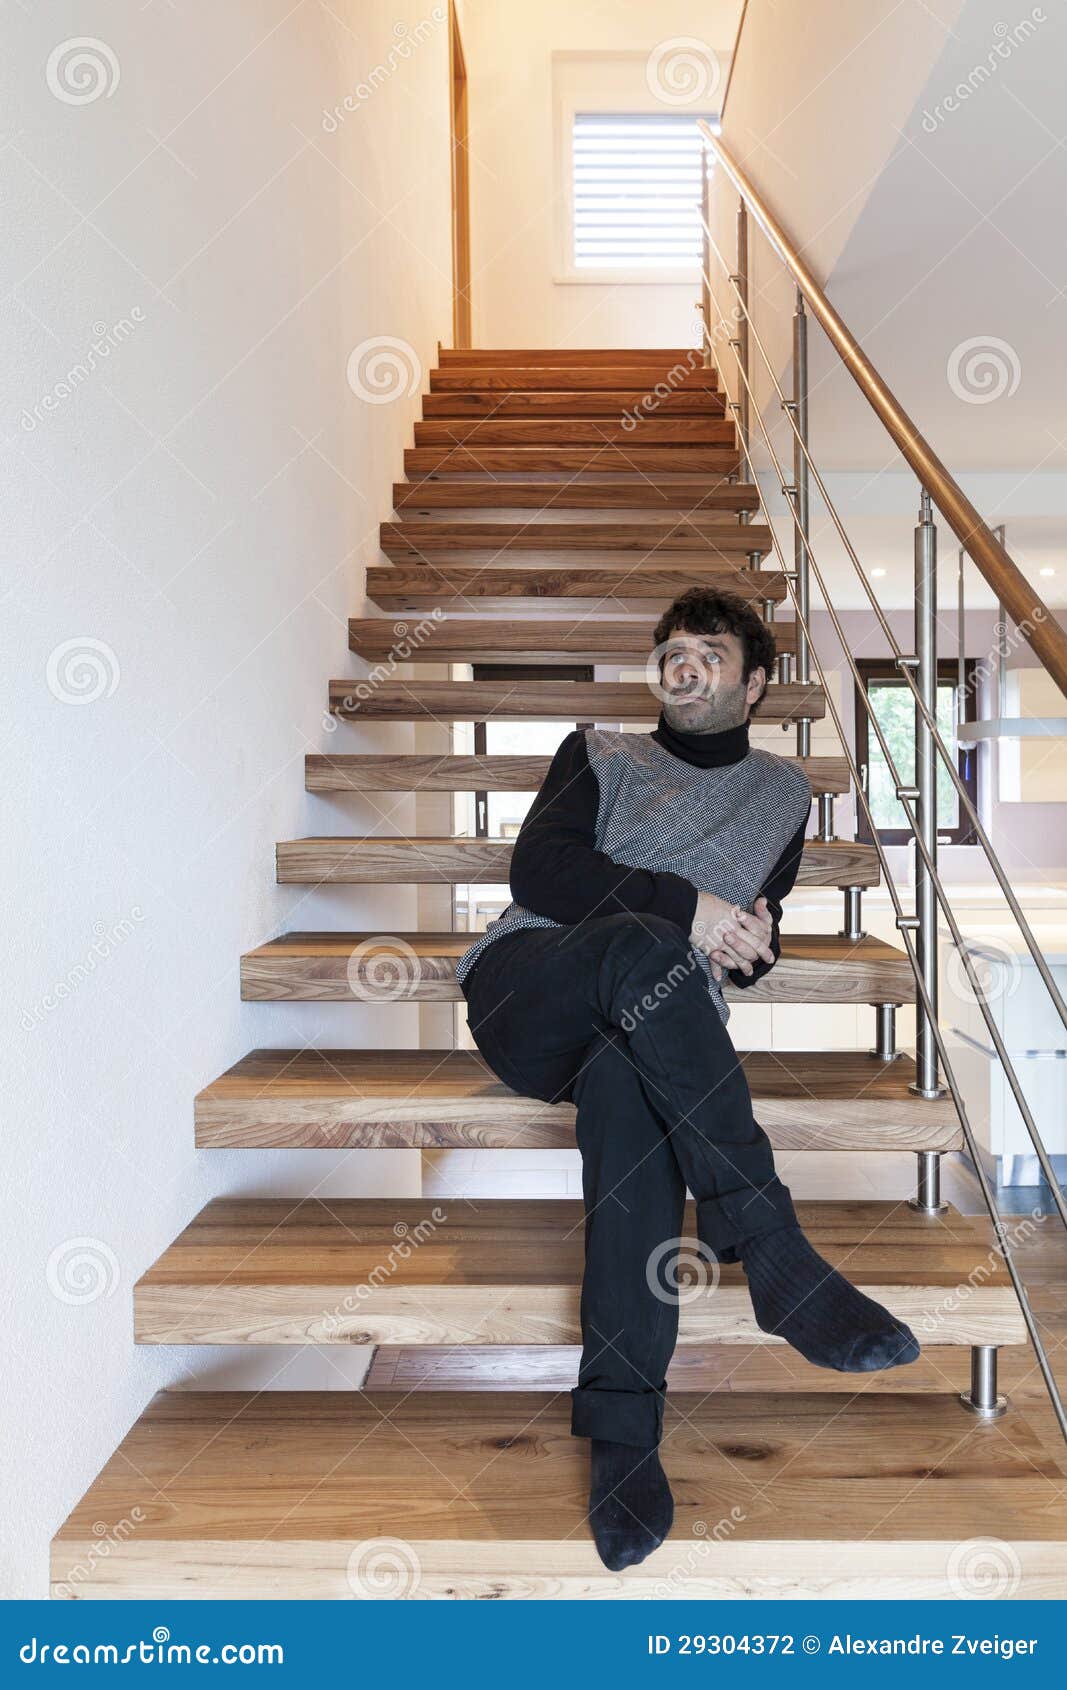 stairs sitting man photography dreamstime